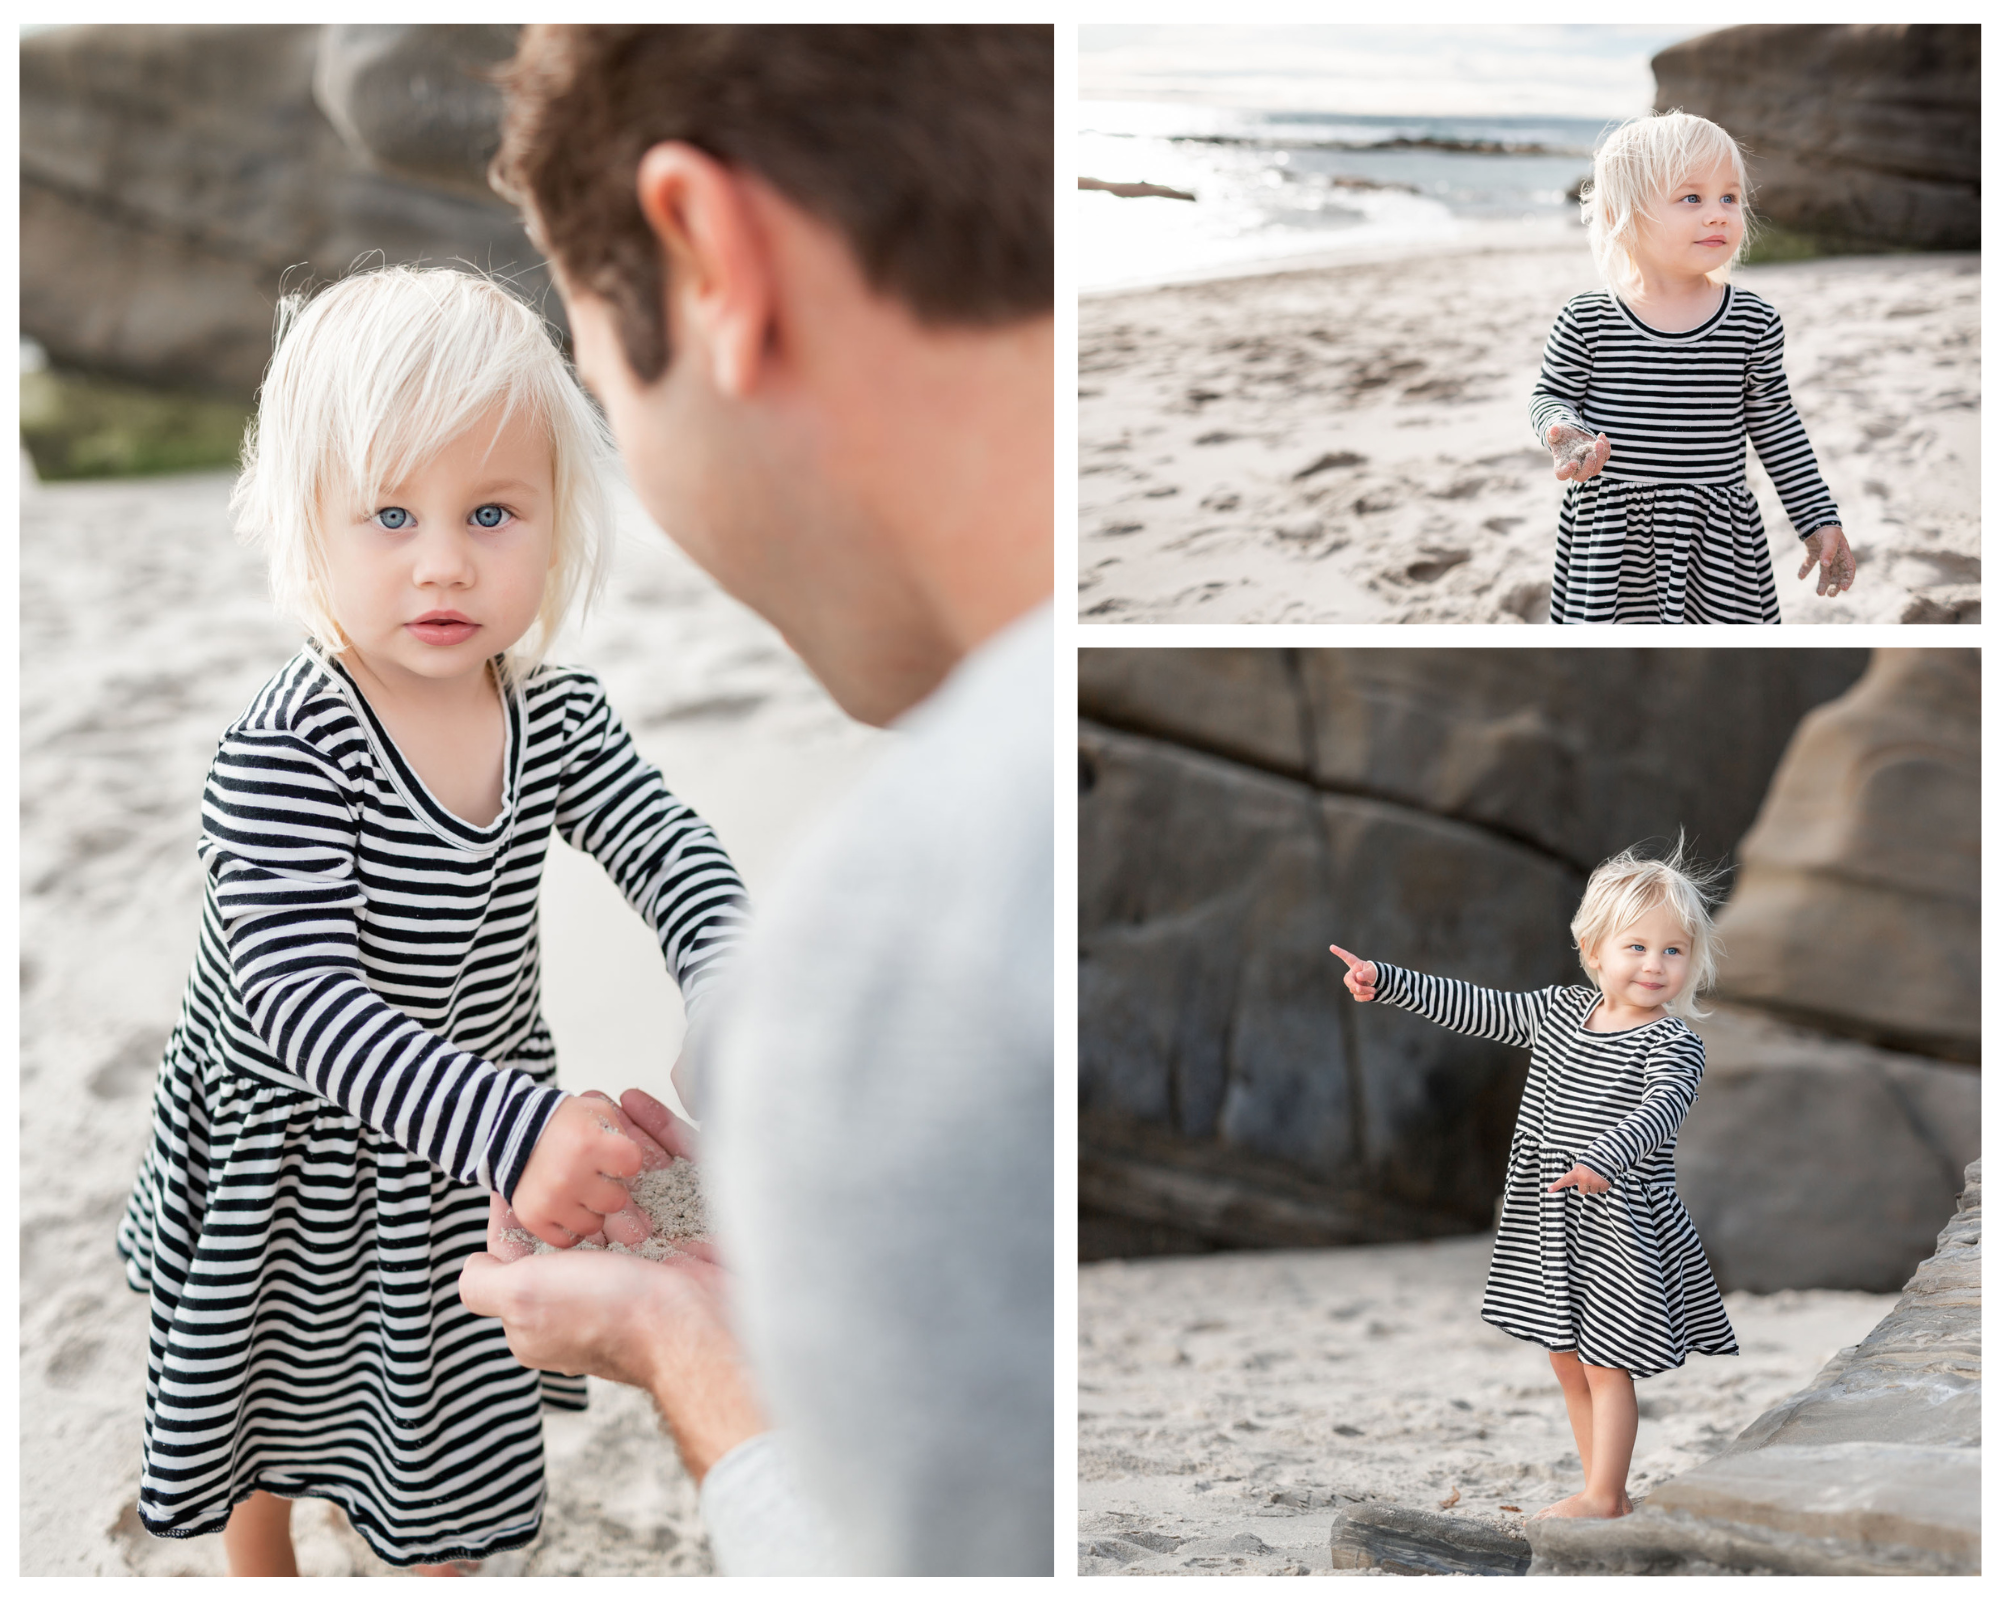 Solo shots of a little girl on the beach during Windansea Beach Pregnancy Announcement captured by La Jolla Family Photographer